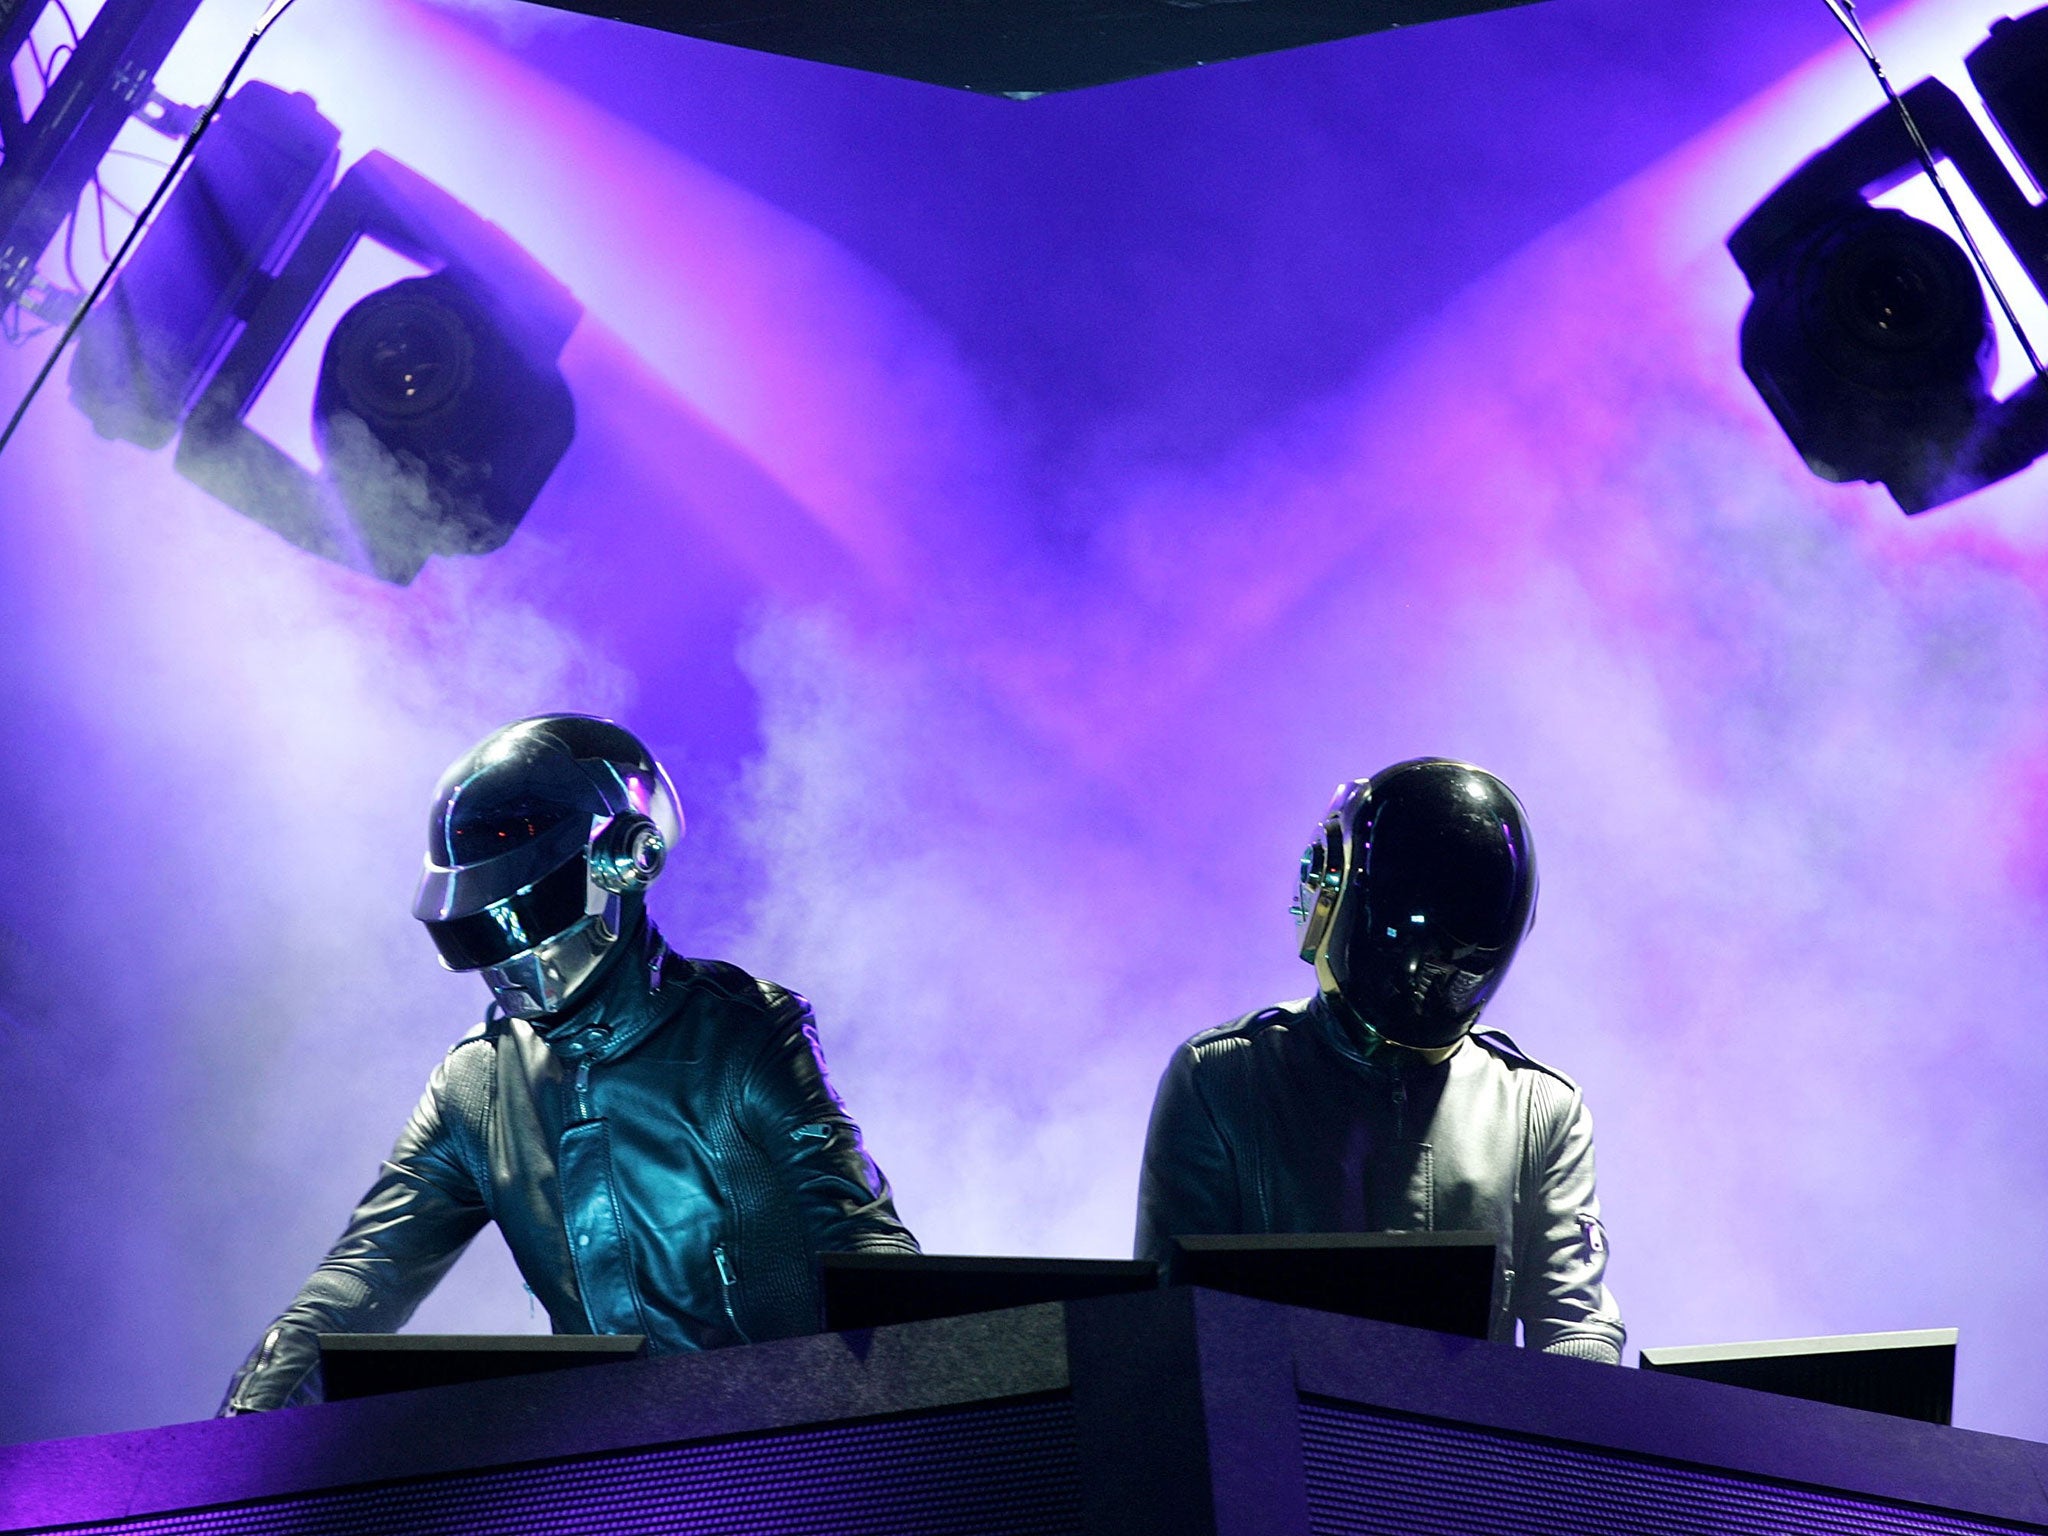 French artists such as Daft Punk, are increasingly singing in English to attract an international audience